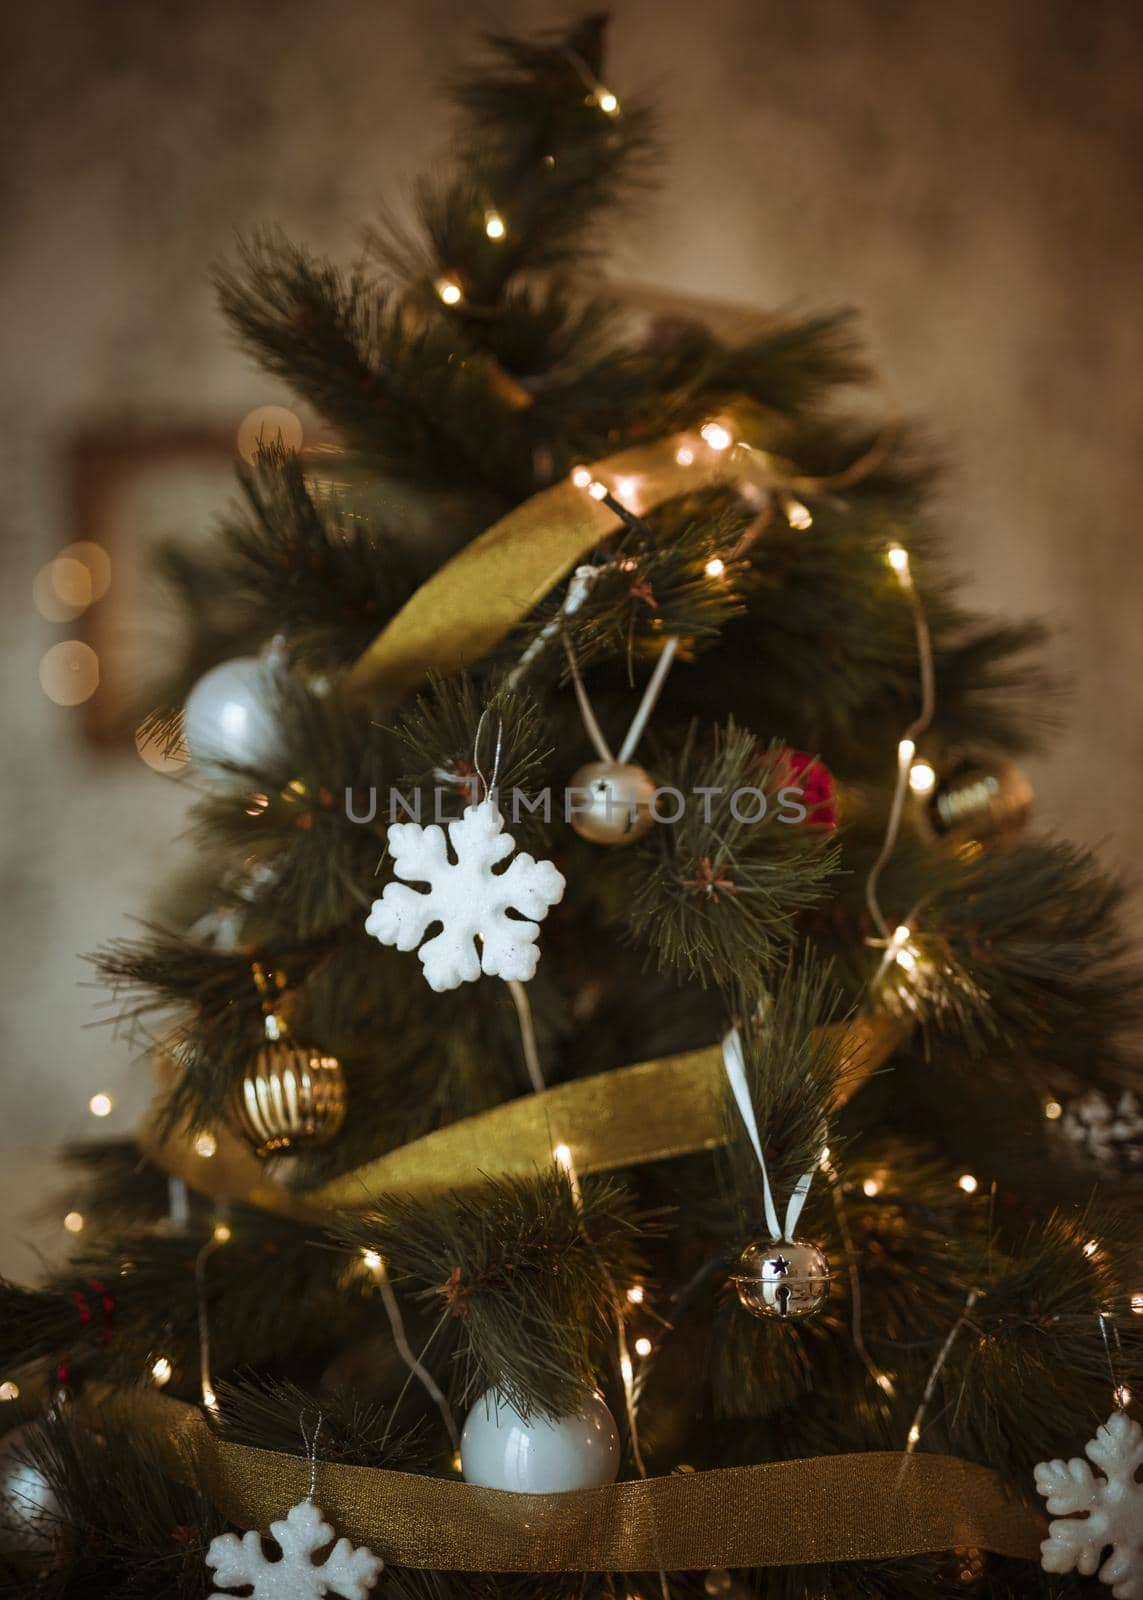 christmas tree decorated with golden white ornaments